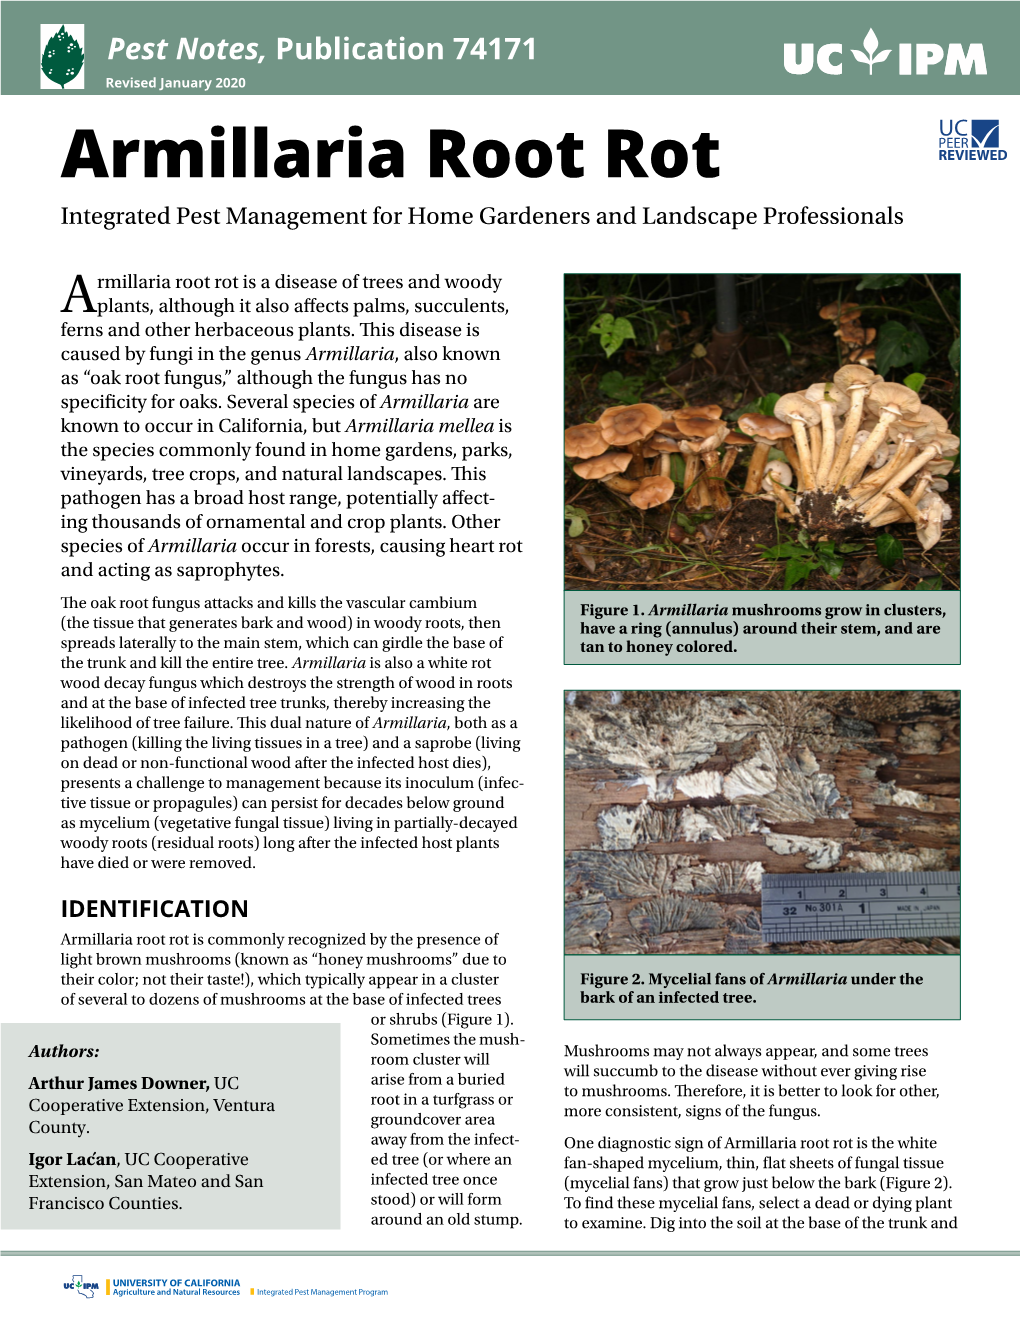 Armillaria Root Rot Integrated Pest Management for Home Gardeners and Landscape Professionals